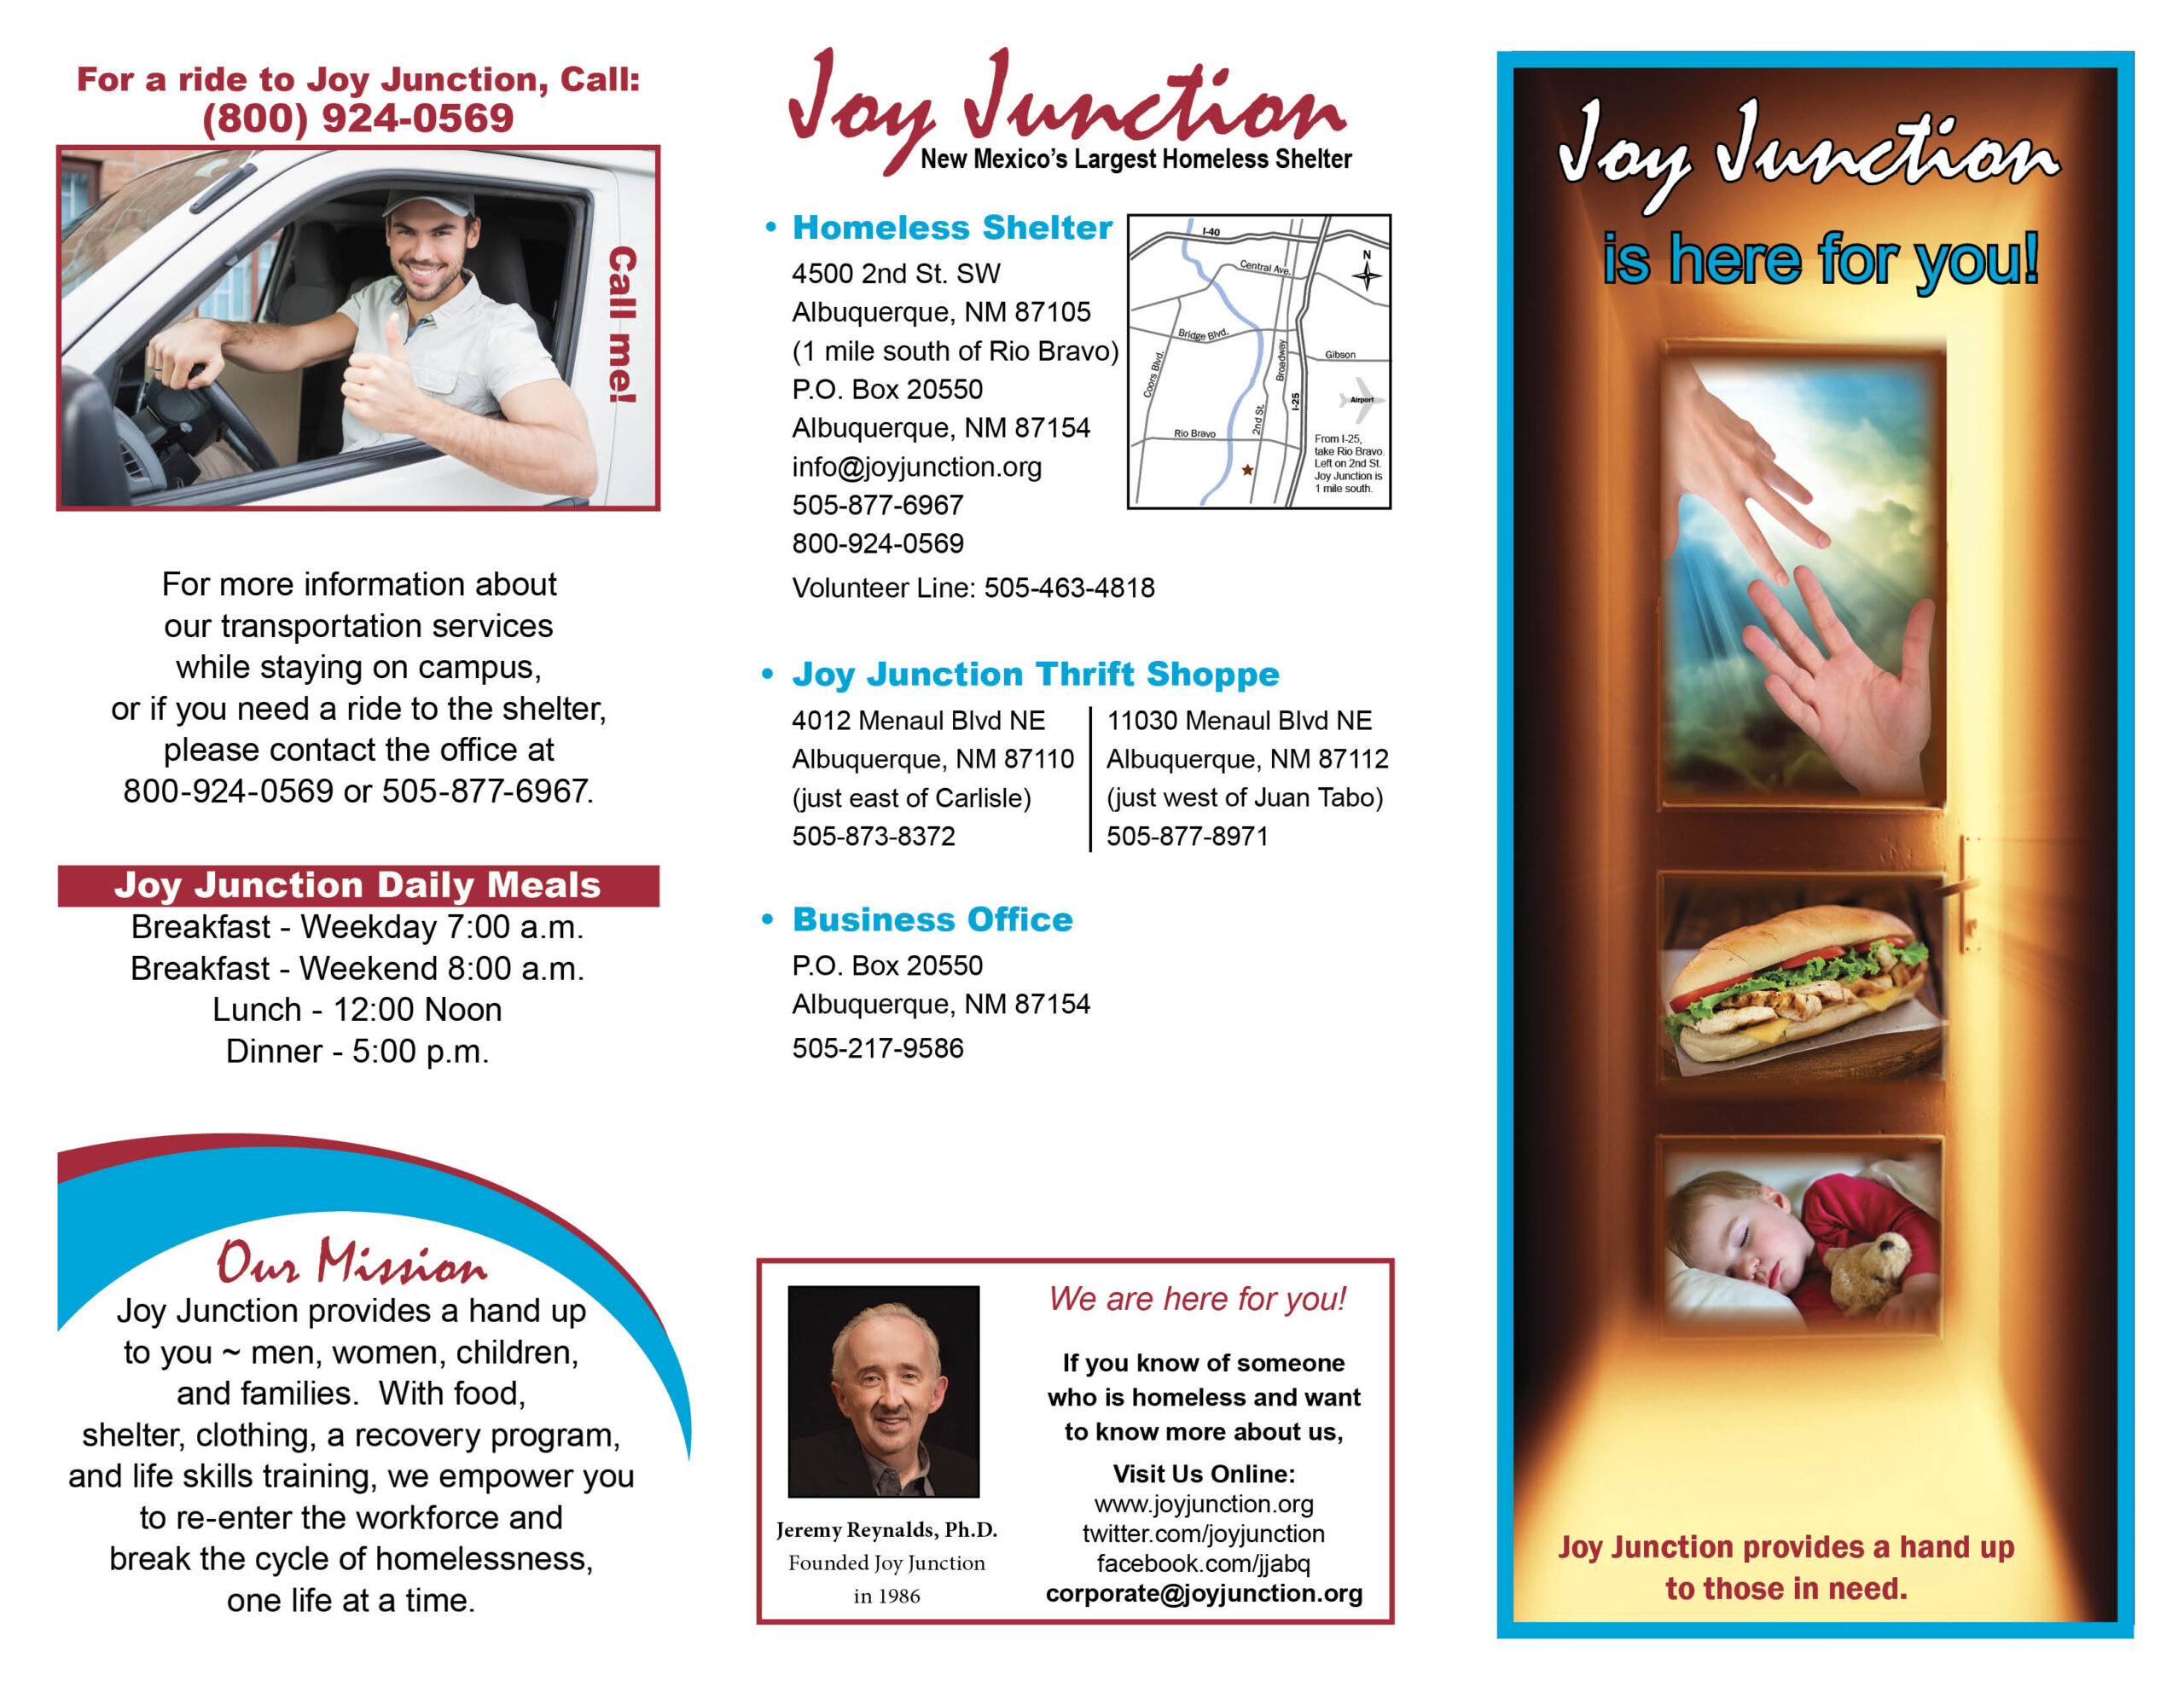 Joy Junction is here for you brochure